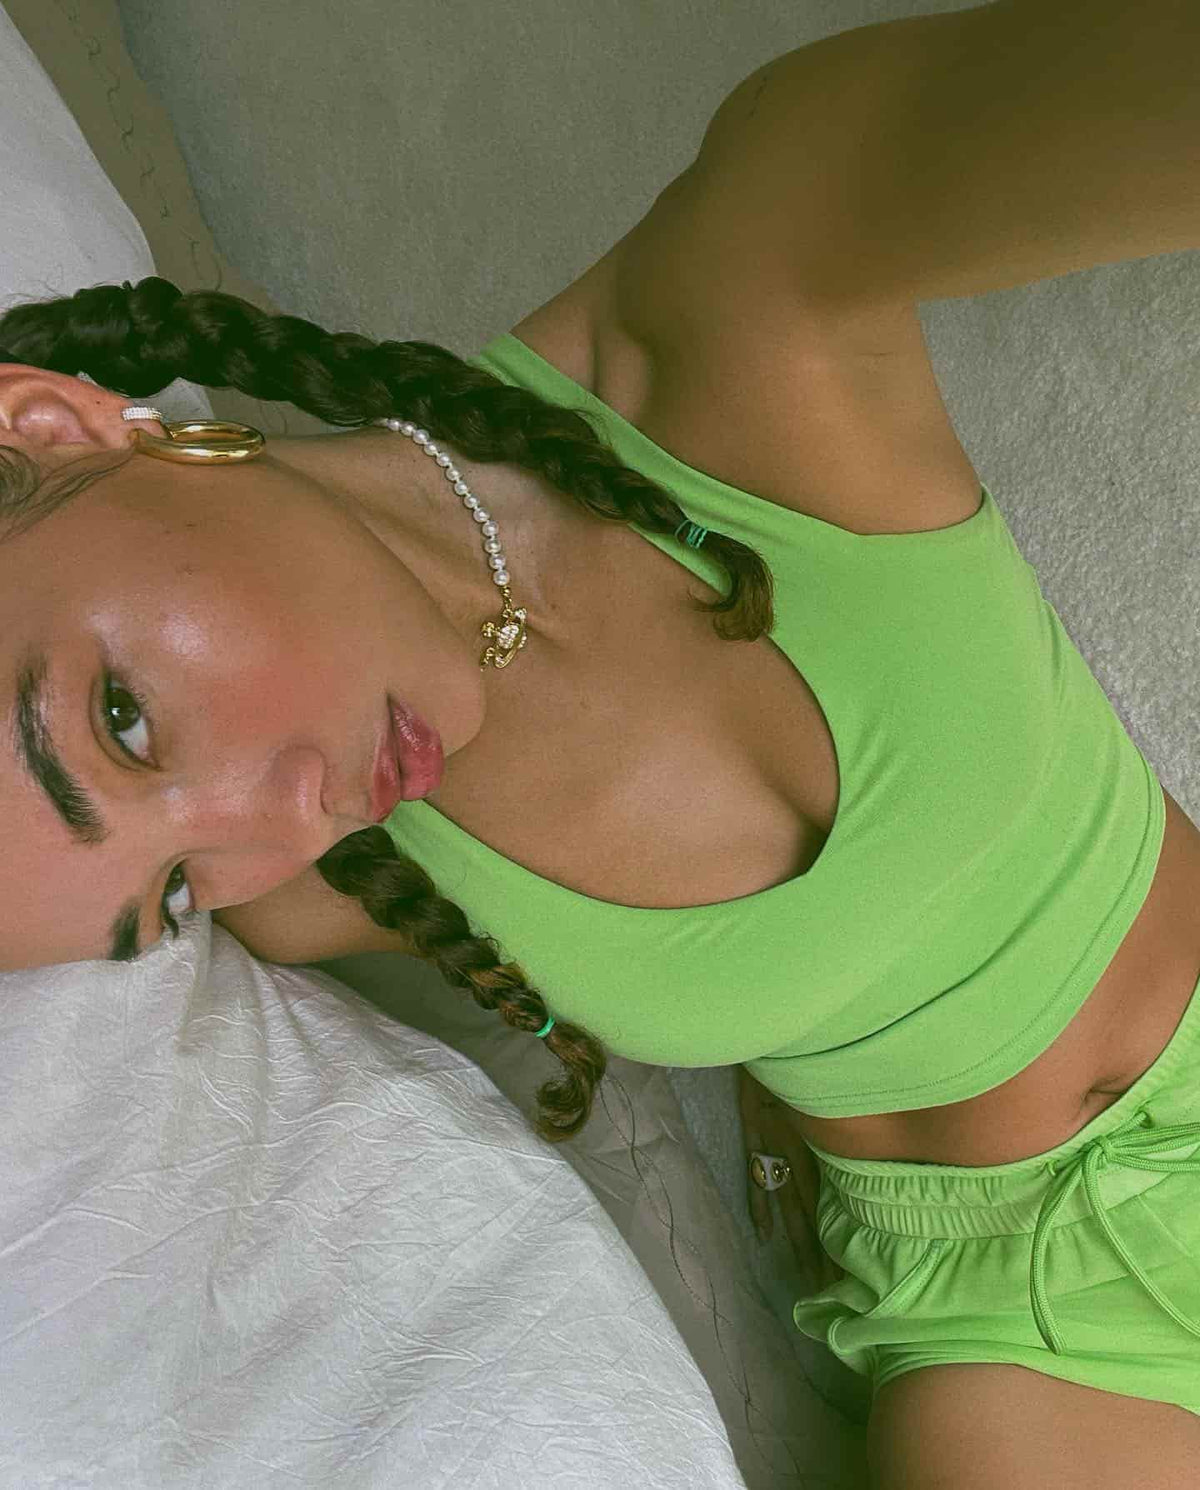 Ashley Moore wearing the Real Bra Tank in Green Apple with matching running shorts while taking a selfie on her bed.  